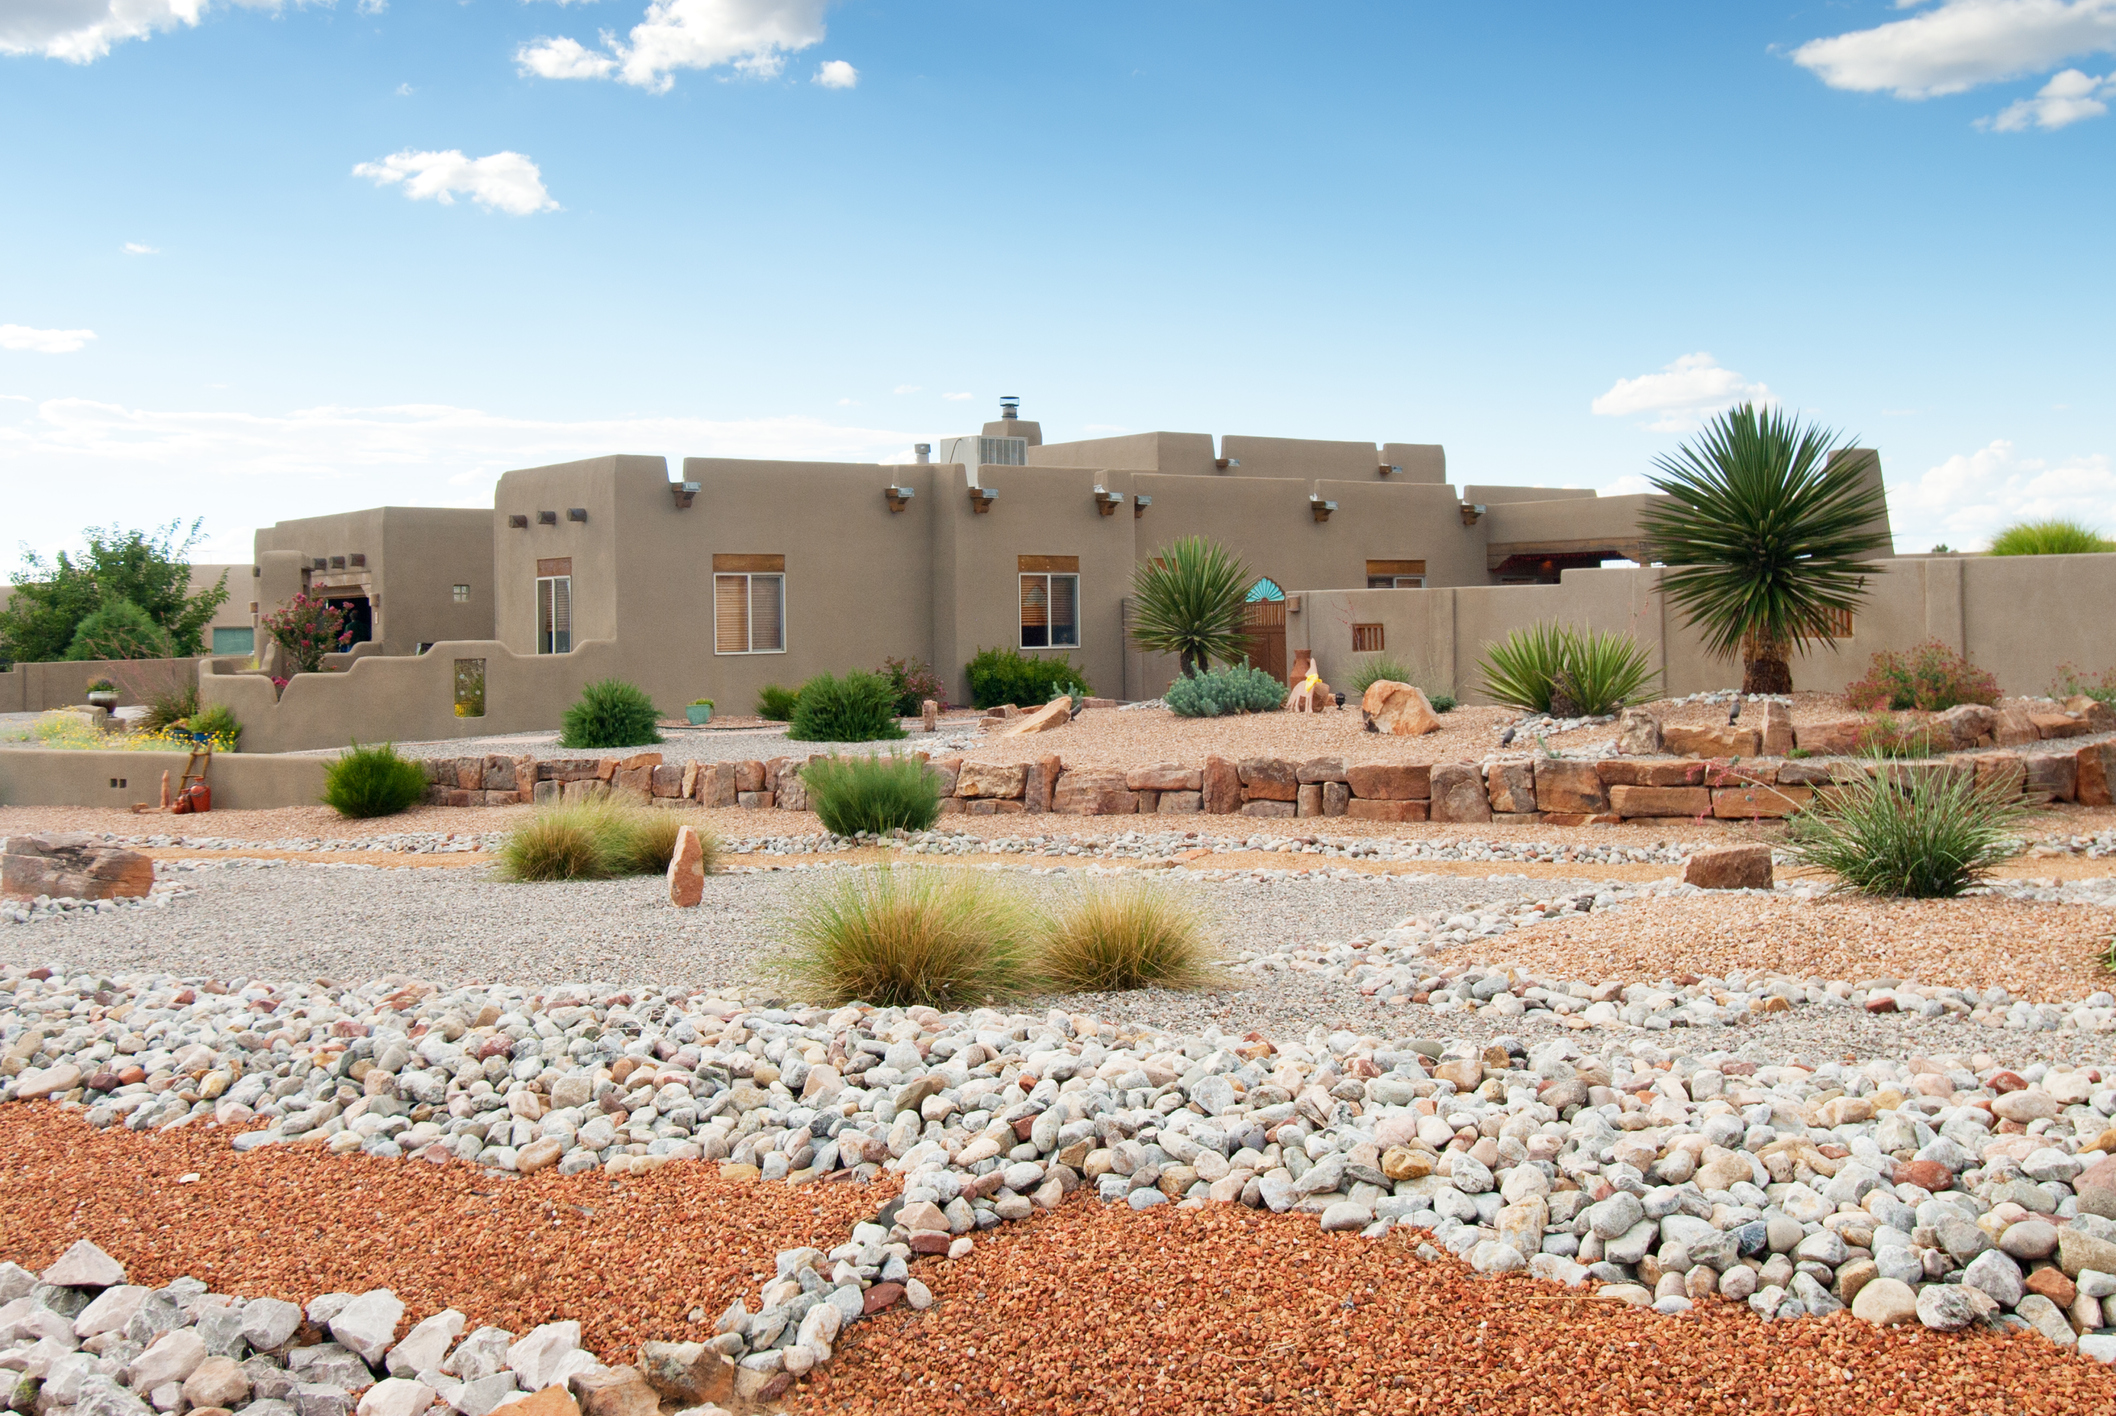 Xeriscaped Southwestern Home